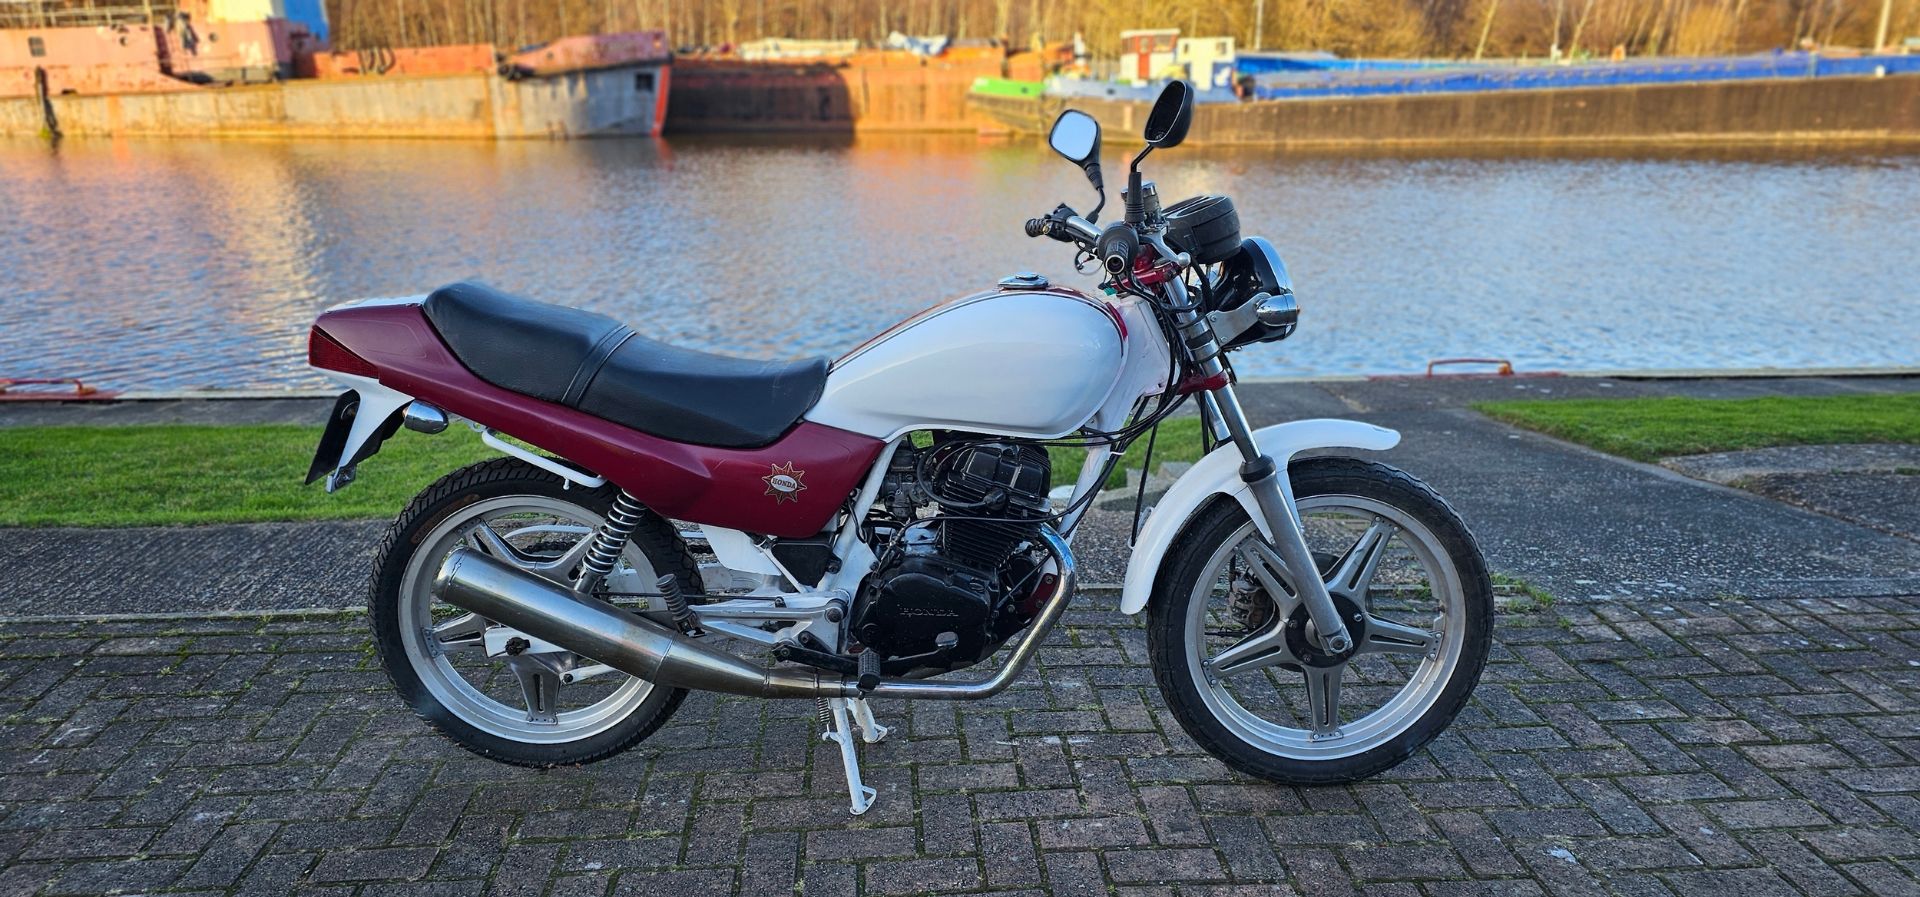 1999 Honda CB250, 234cc. PLEASE NOTE THIS IS A CAT C MOTORCYCLE. Registration number T855 SBB. Frame